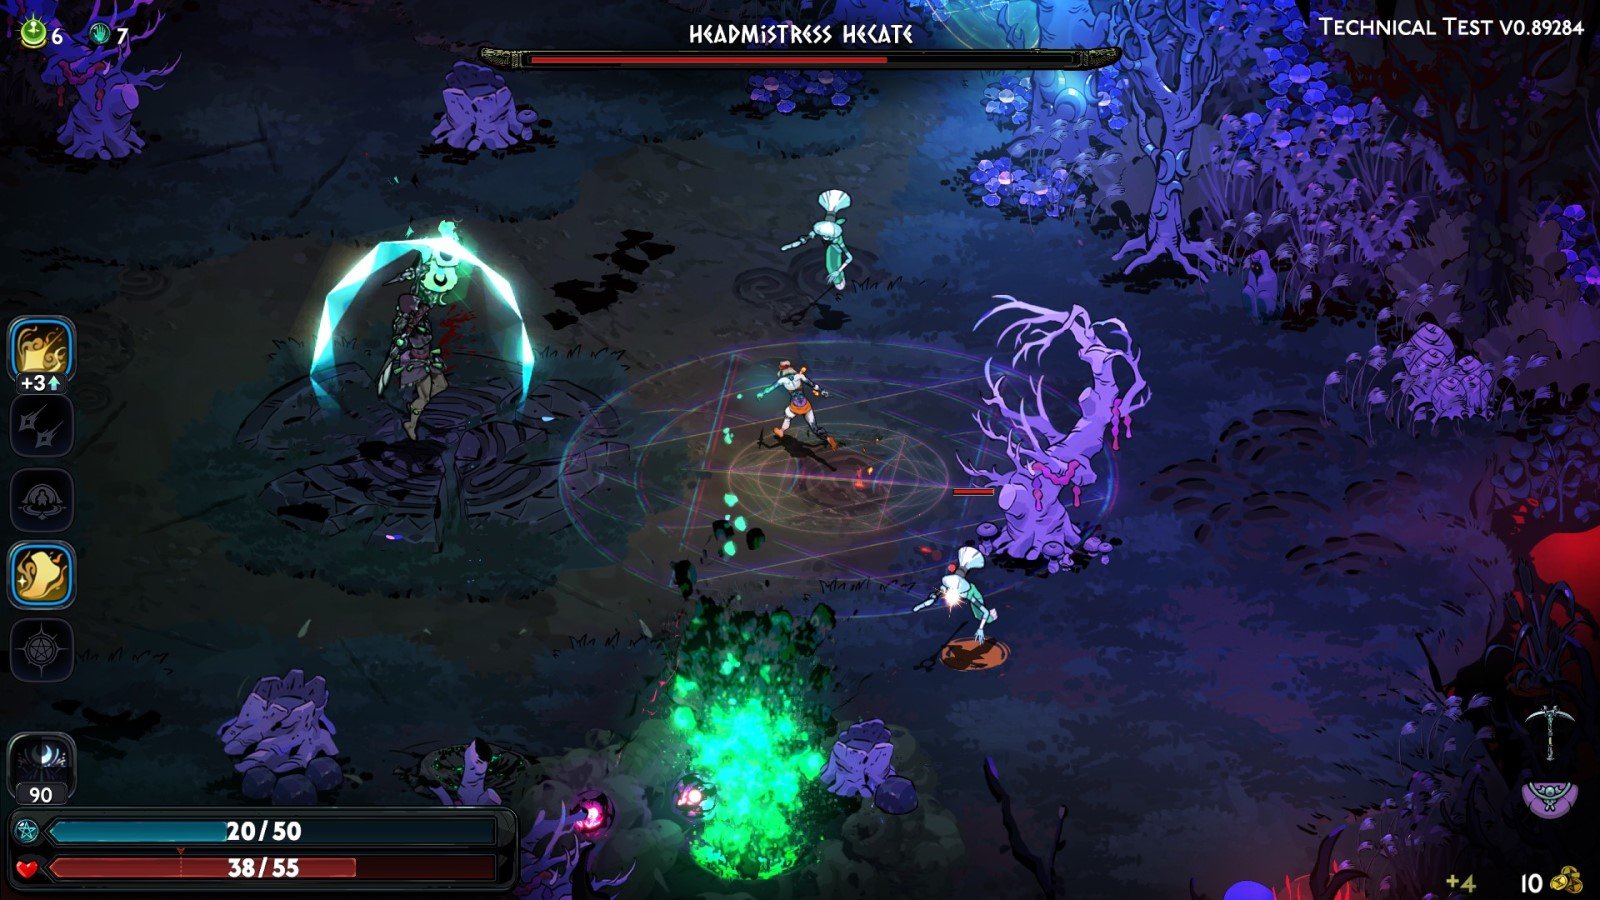 A screenshot from the Hades II Technical Test, showing Melinoe in a boss fight against Hecate.